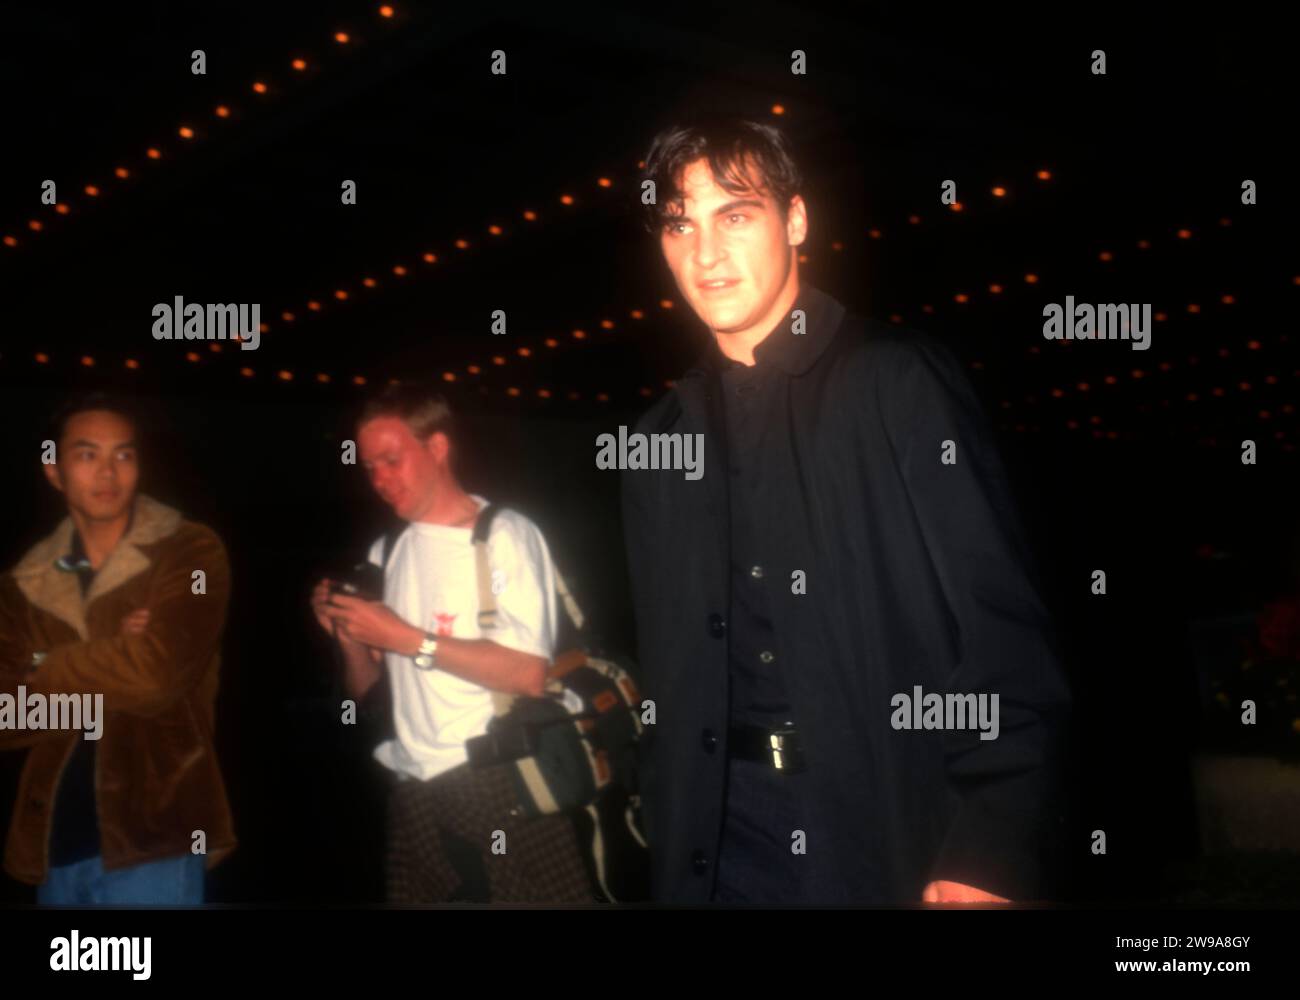 Century City, California, USA 30th September 1996 Actor Joaquin Phoenix attends 20th Century StudioÕs ÔThat Thing You DoÕ Premiere at Century City Cineplex Odeon Theaters on September 30, 1996 in Century City, California, USA. Photo by Barry King/Alamy Stock Photo Stock Photo